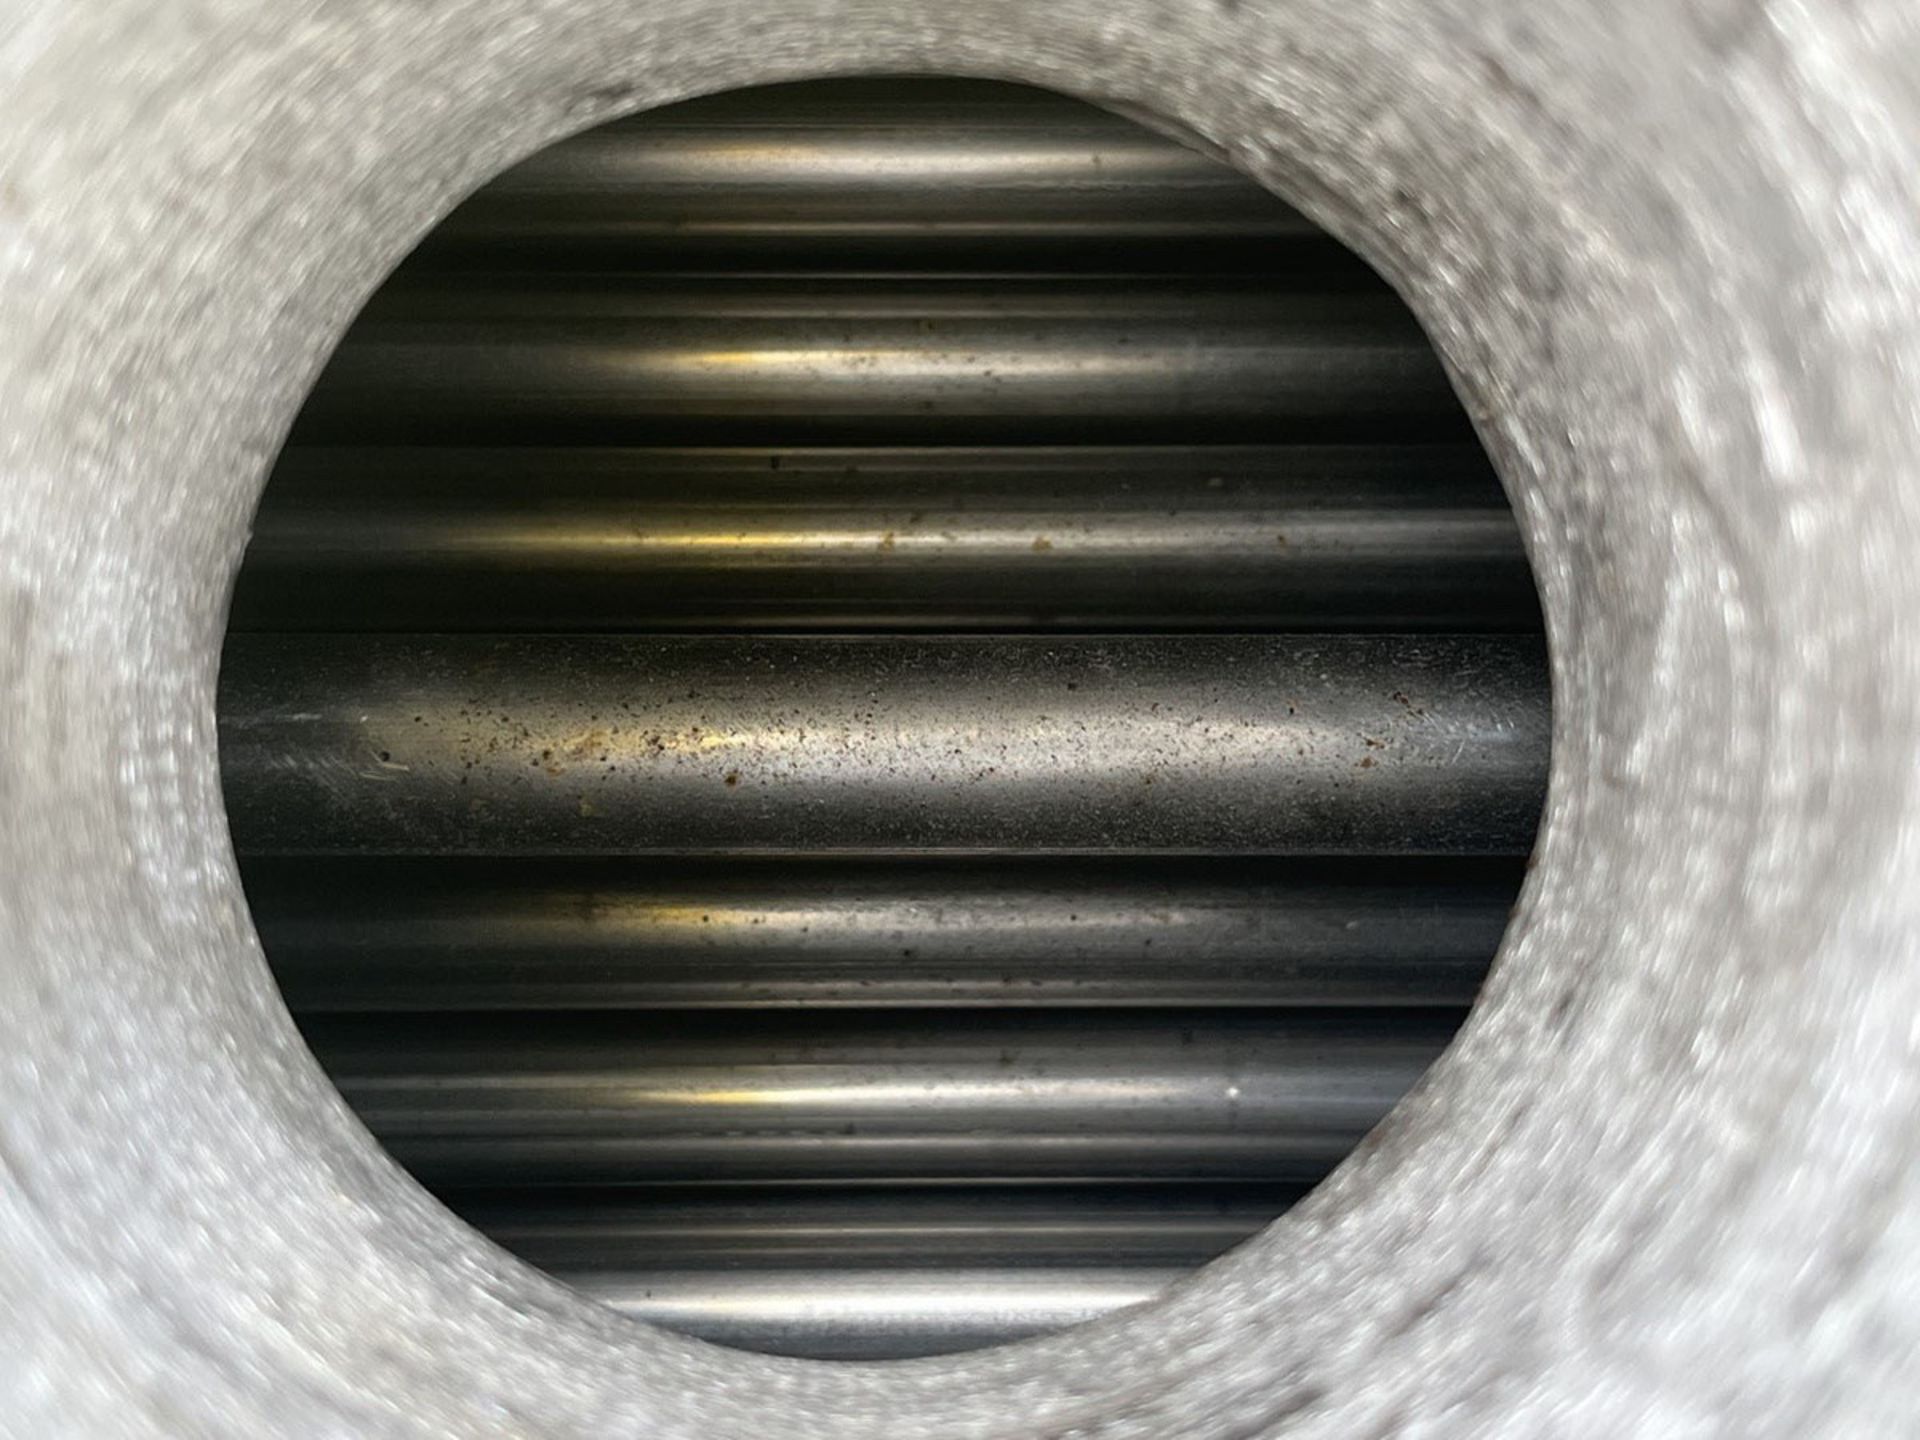 490 Sq Ft Atlas Shell and Tube Heat Exchanger, 316 Stainless Steel Tubes, | Rig Fee $25 - Image 6 of 6